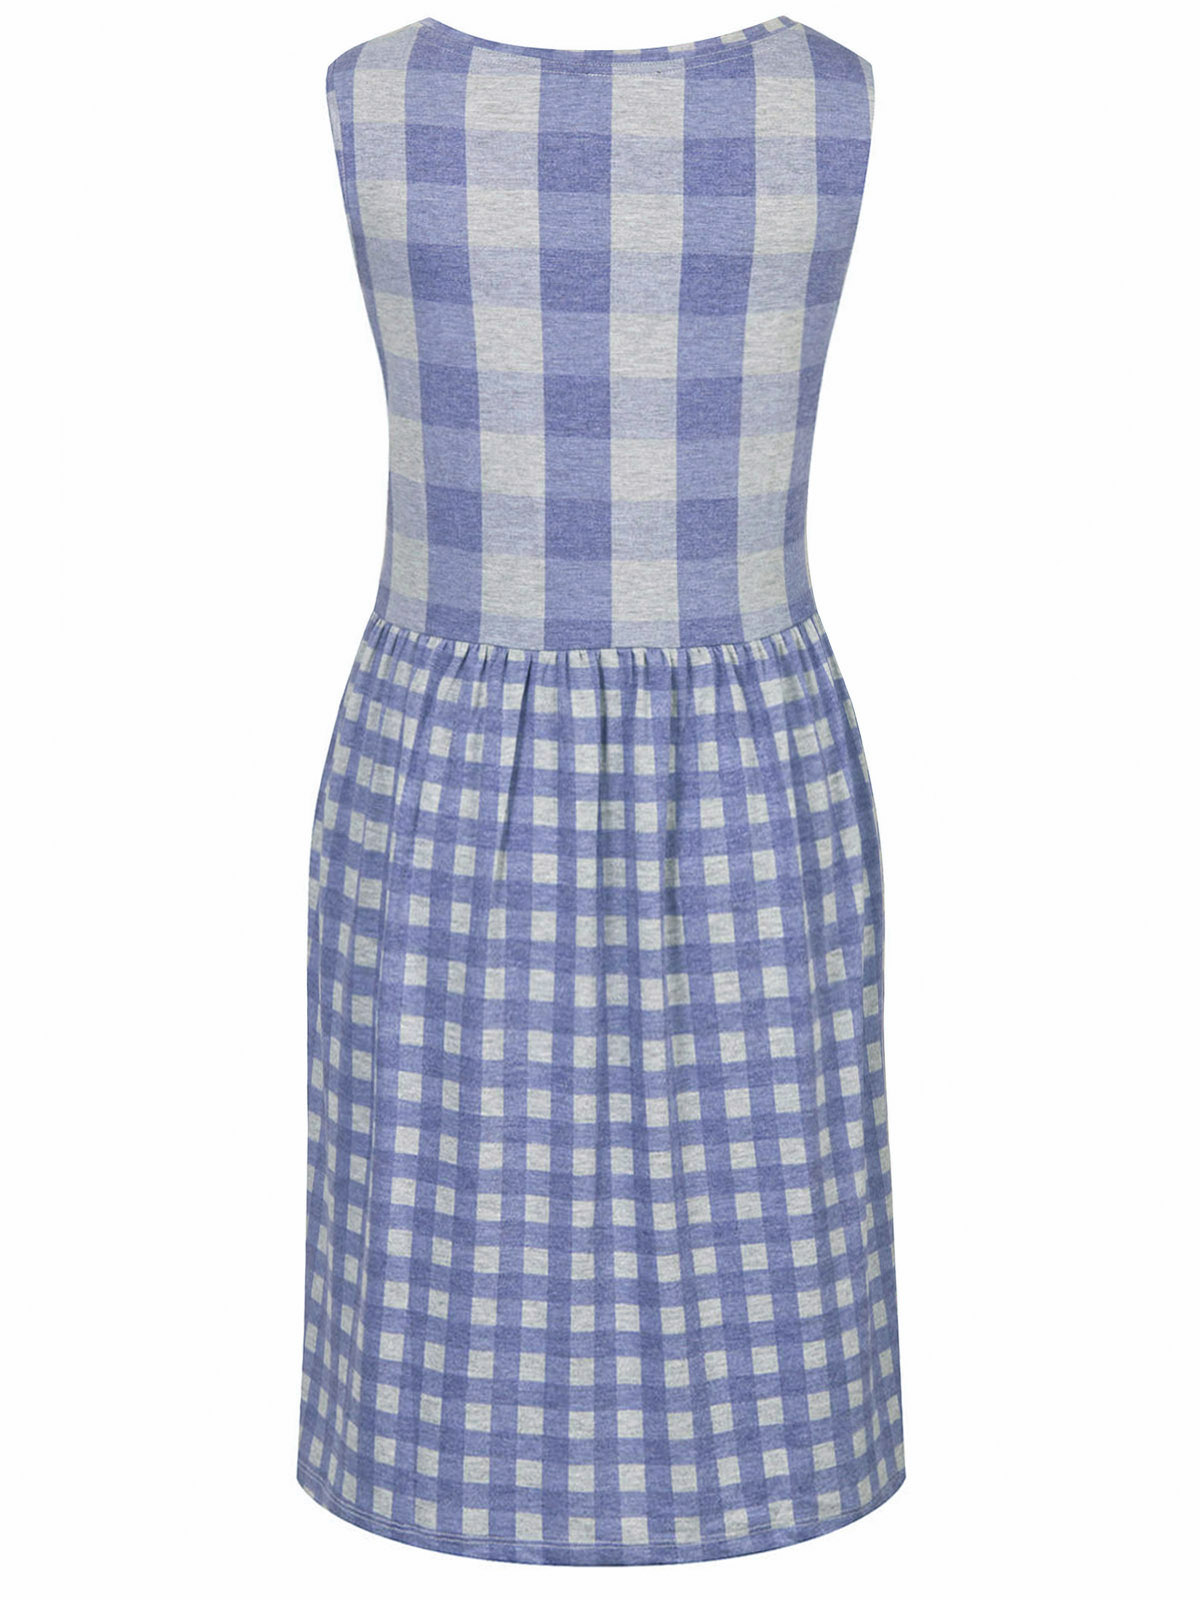 Topshop - - T0pshop BLUE Sleeveless Gingham Checked Skater Dress - Size ...